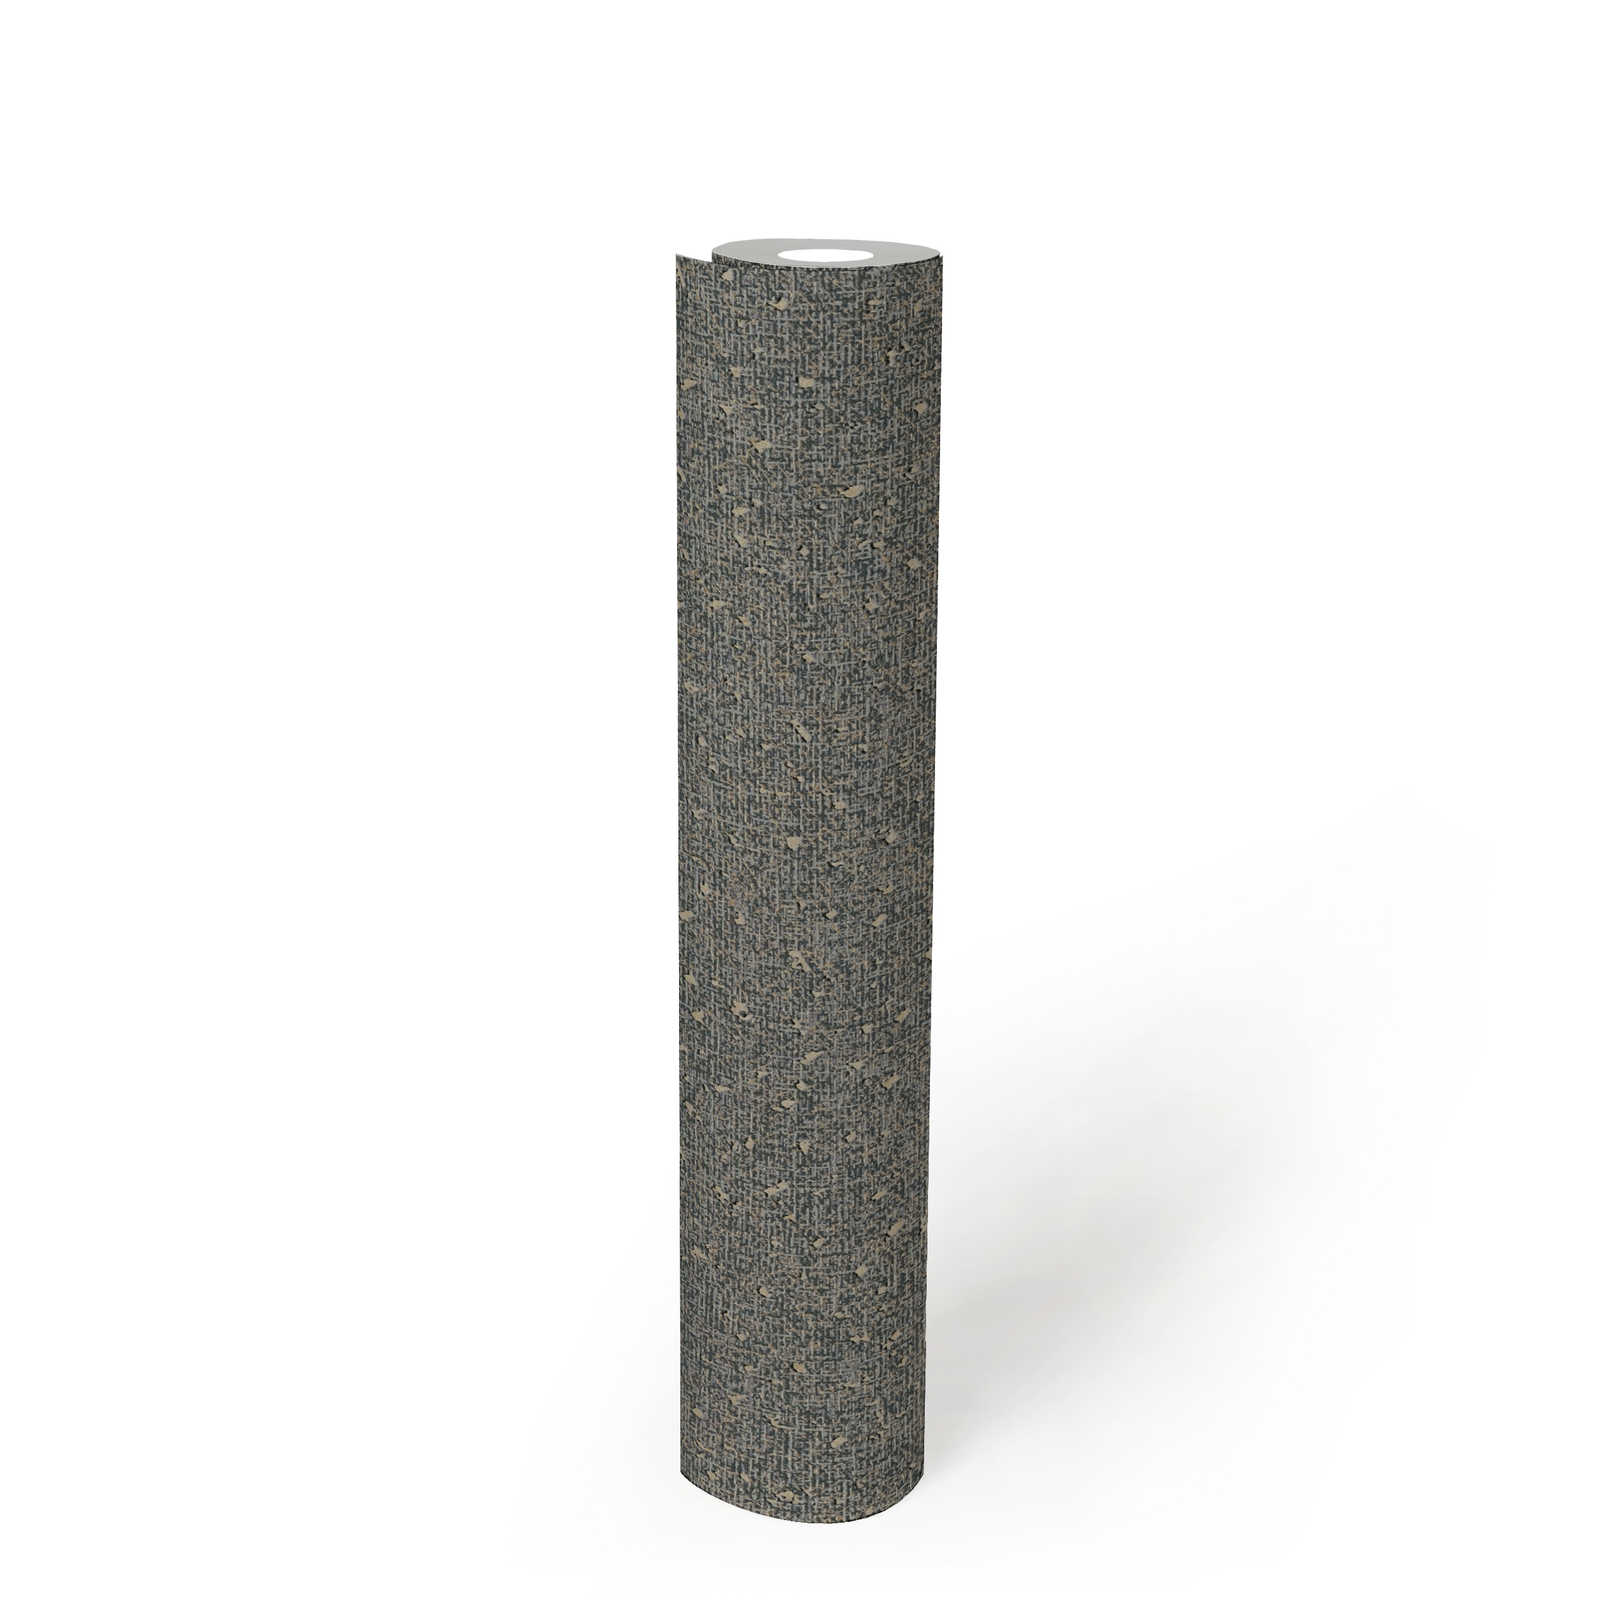             Wallpaper with textile structure and metallic accent - grey, metallic
        